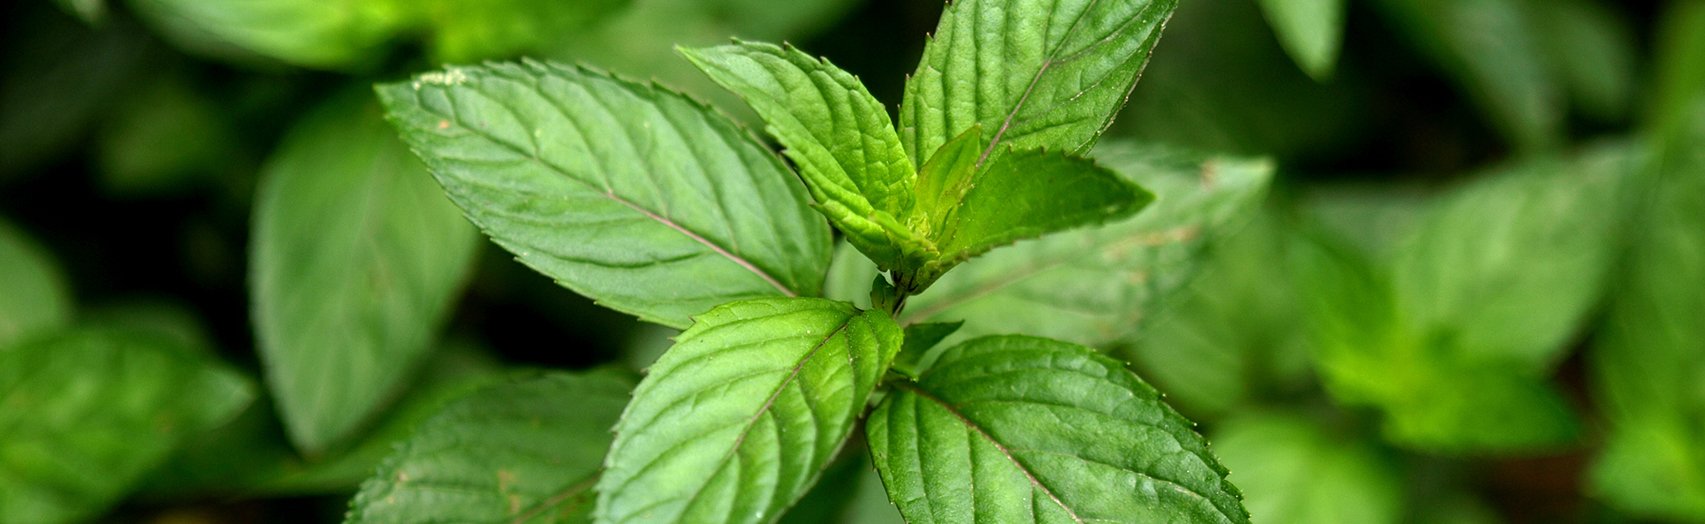 Close up view of a peppermint plant